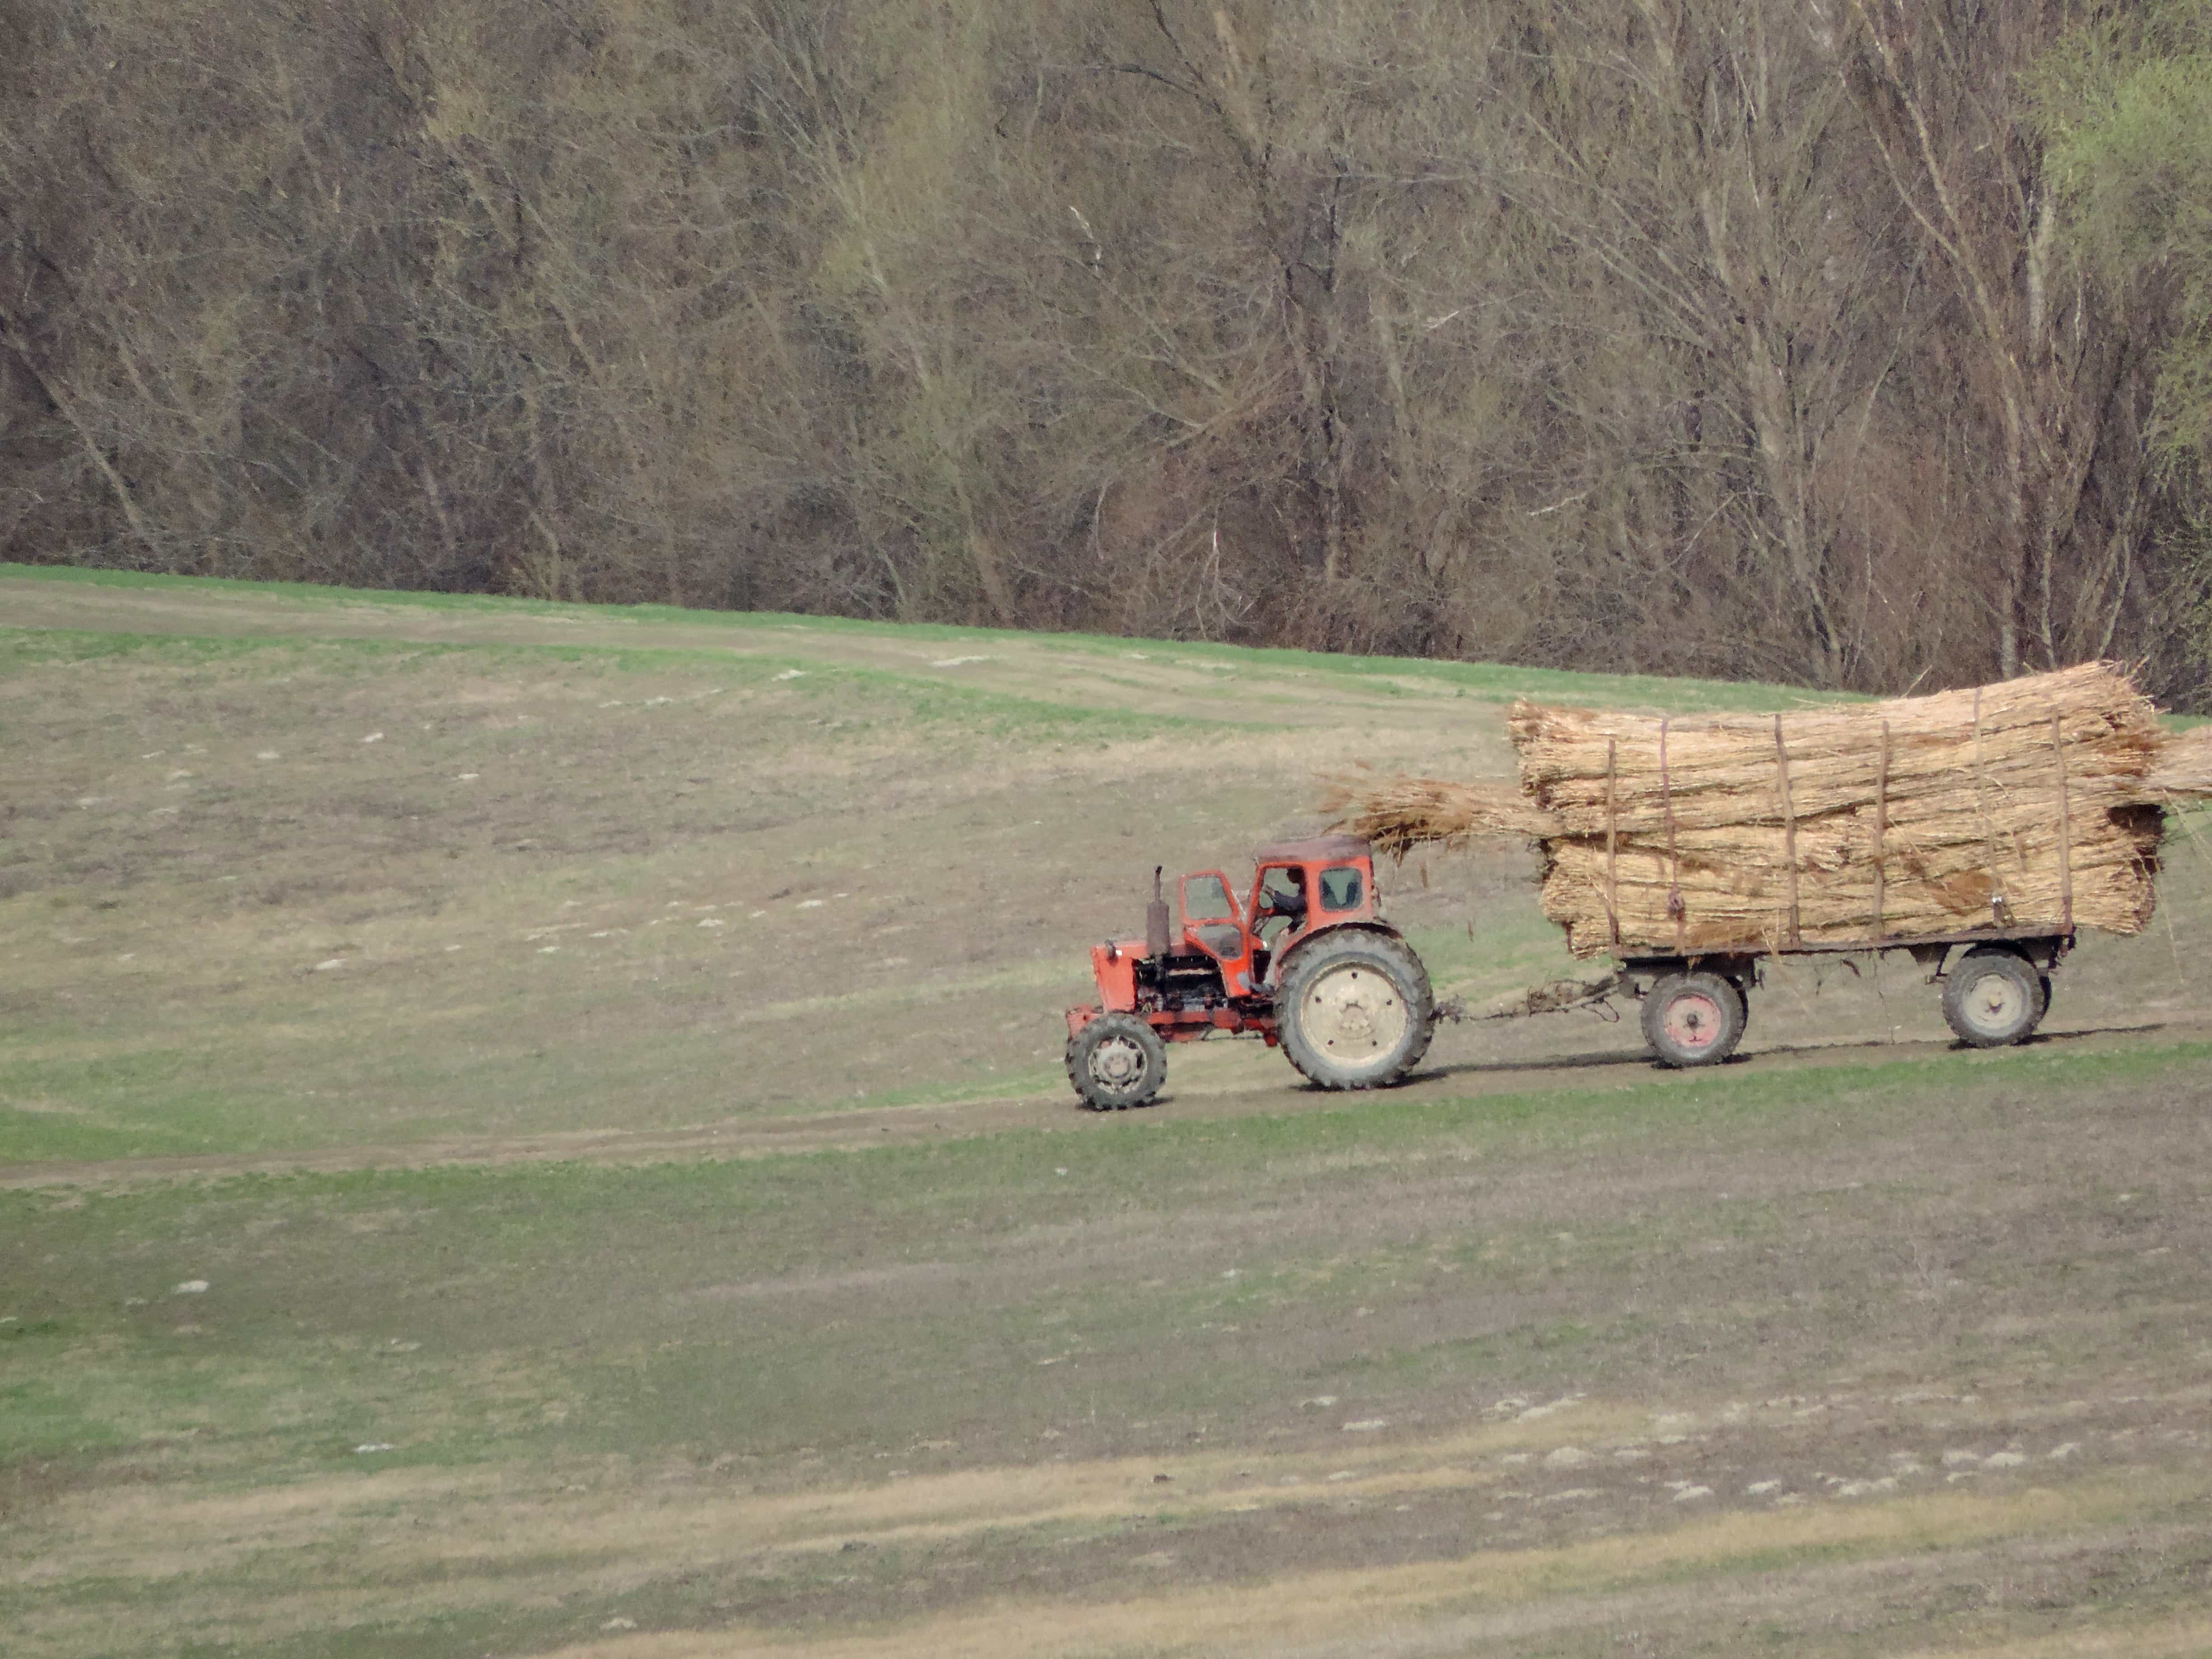 Free picture: agriculture, field work, tractor, vehicle, landscape, farm, machine, field